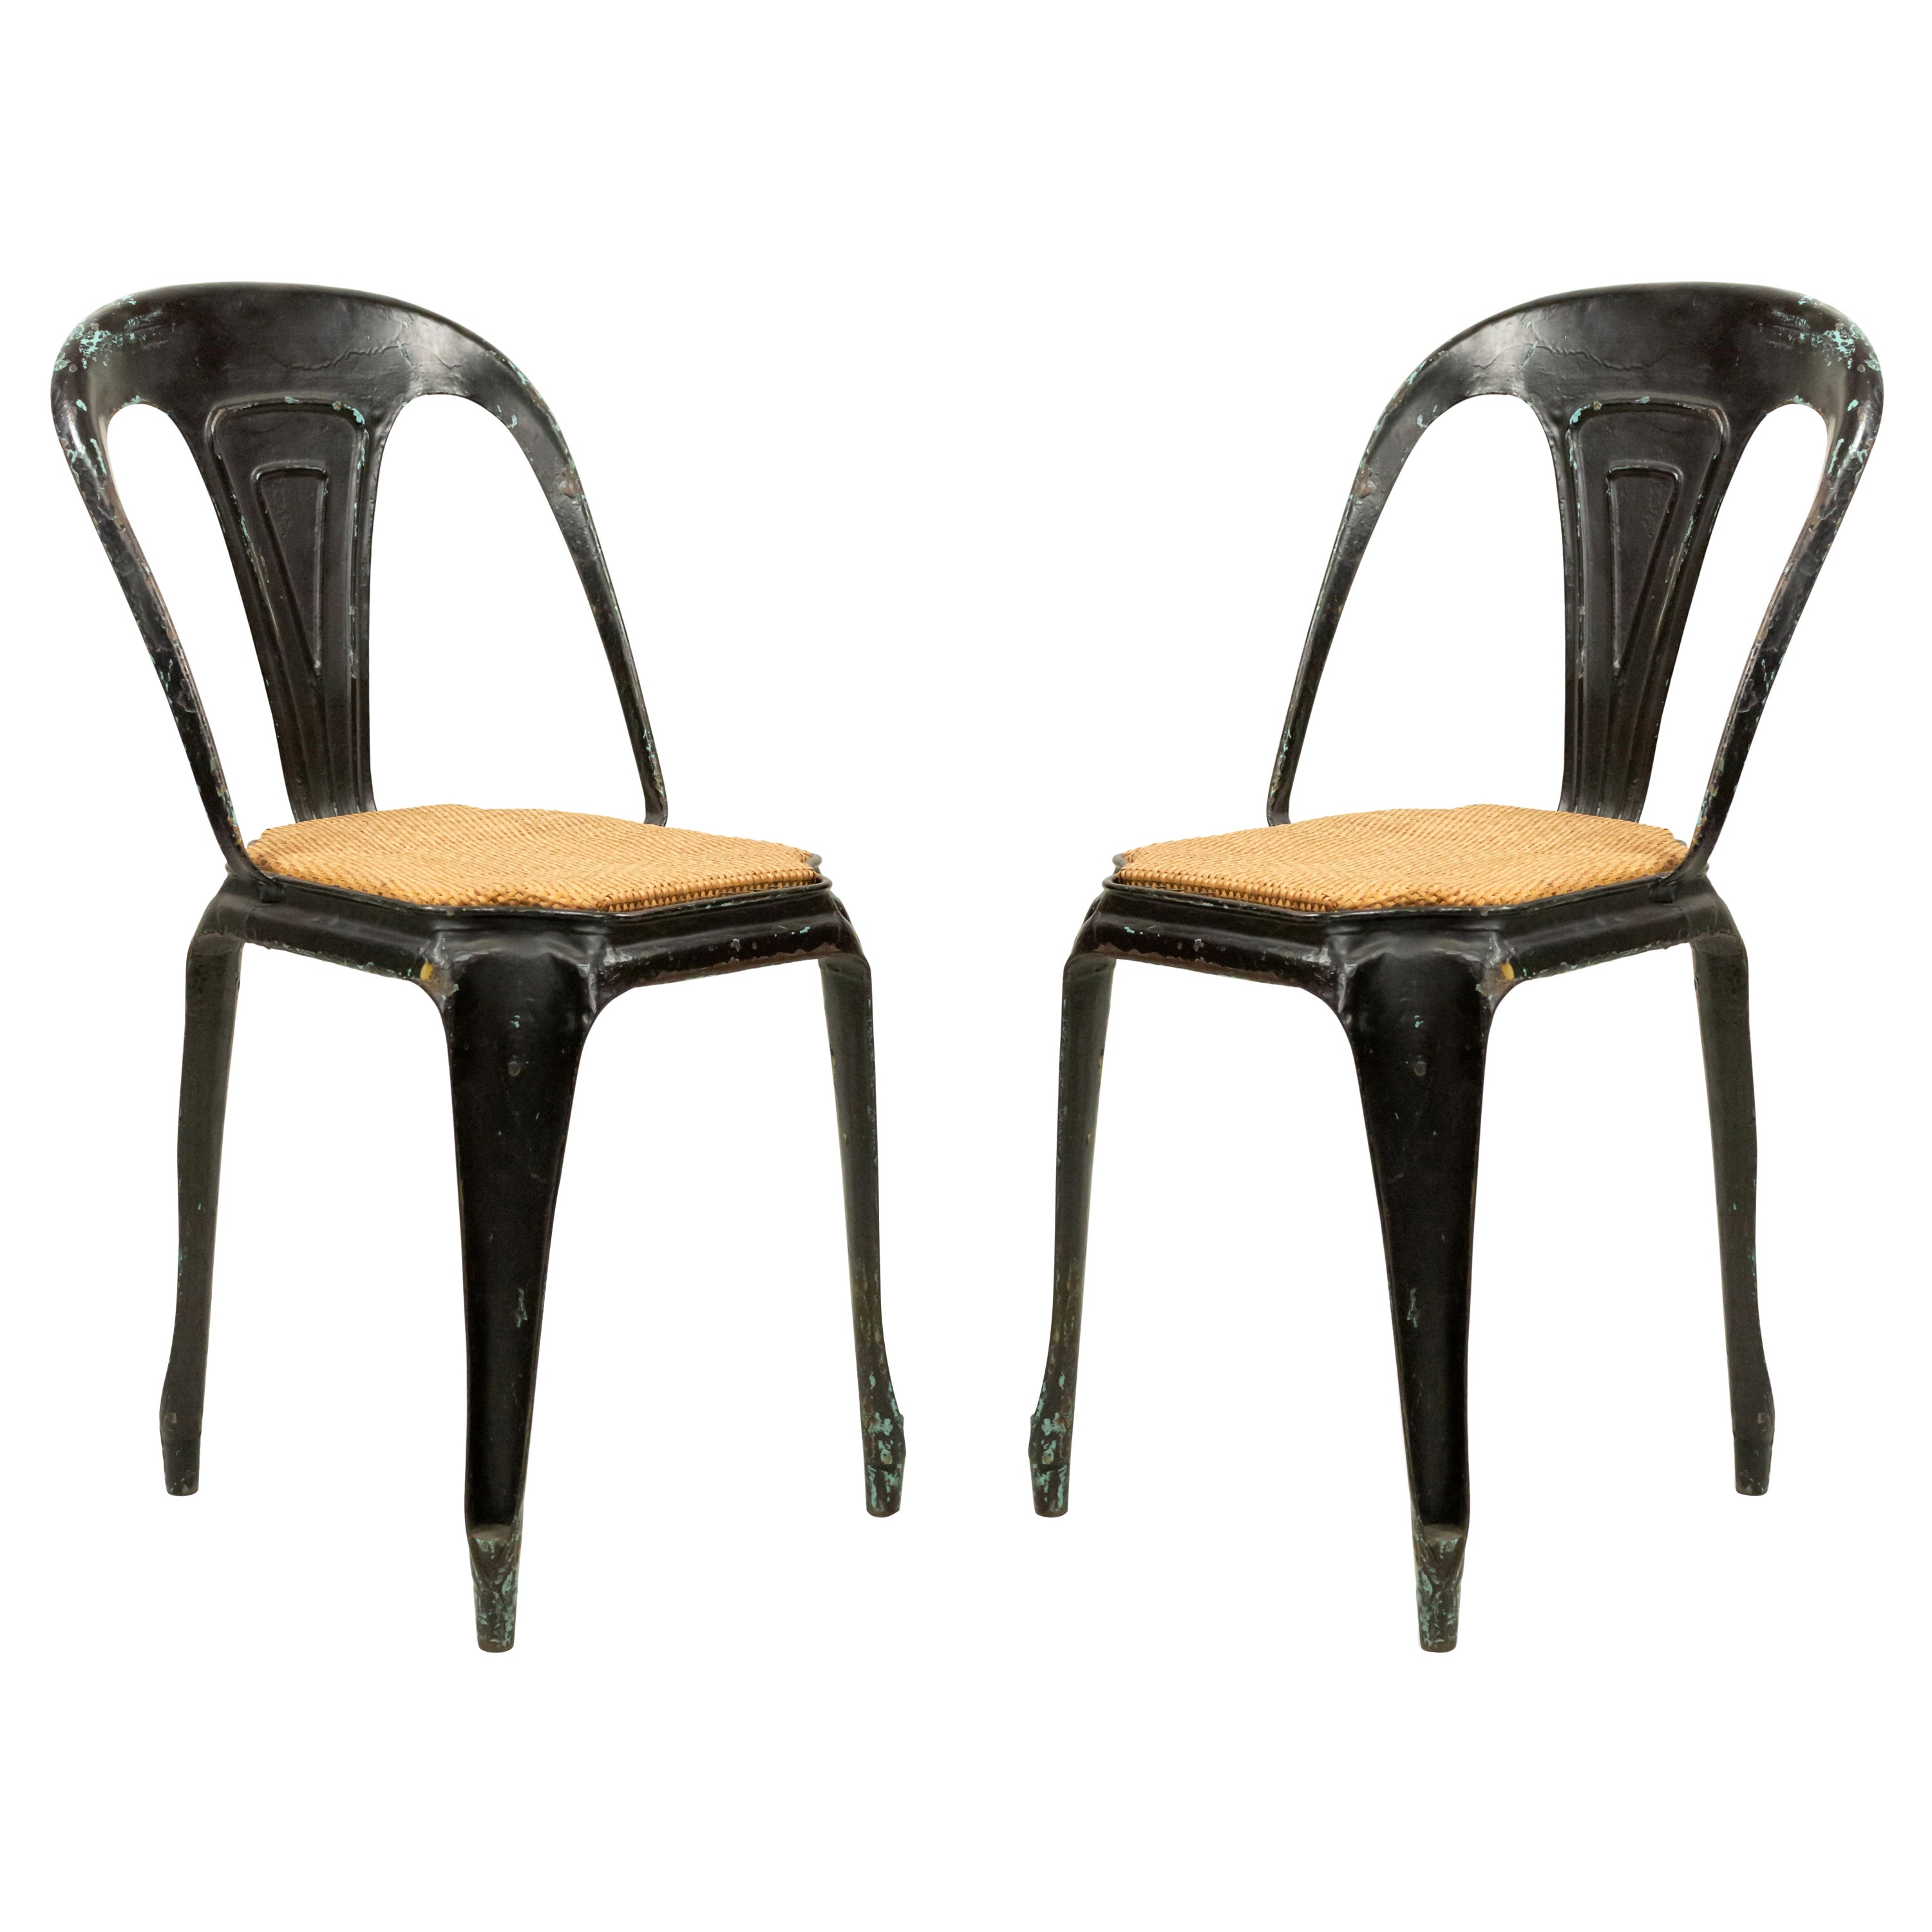 2 French Art Deco Metal Cafe Side Chairs